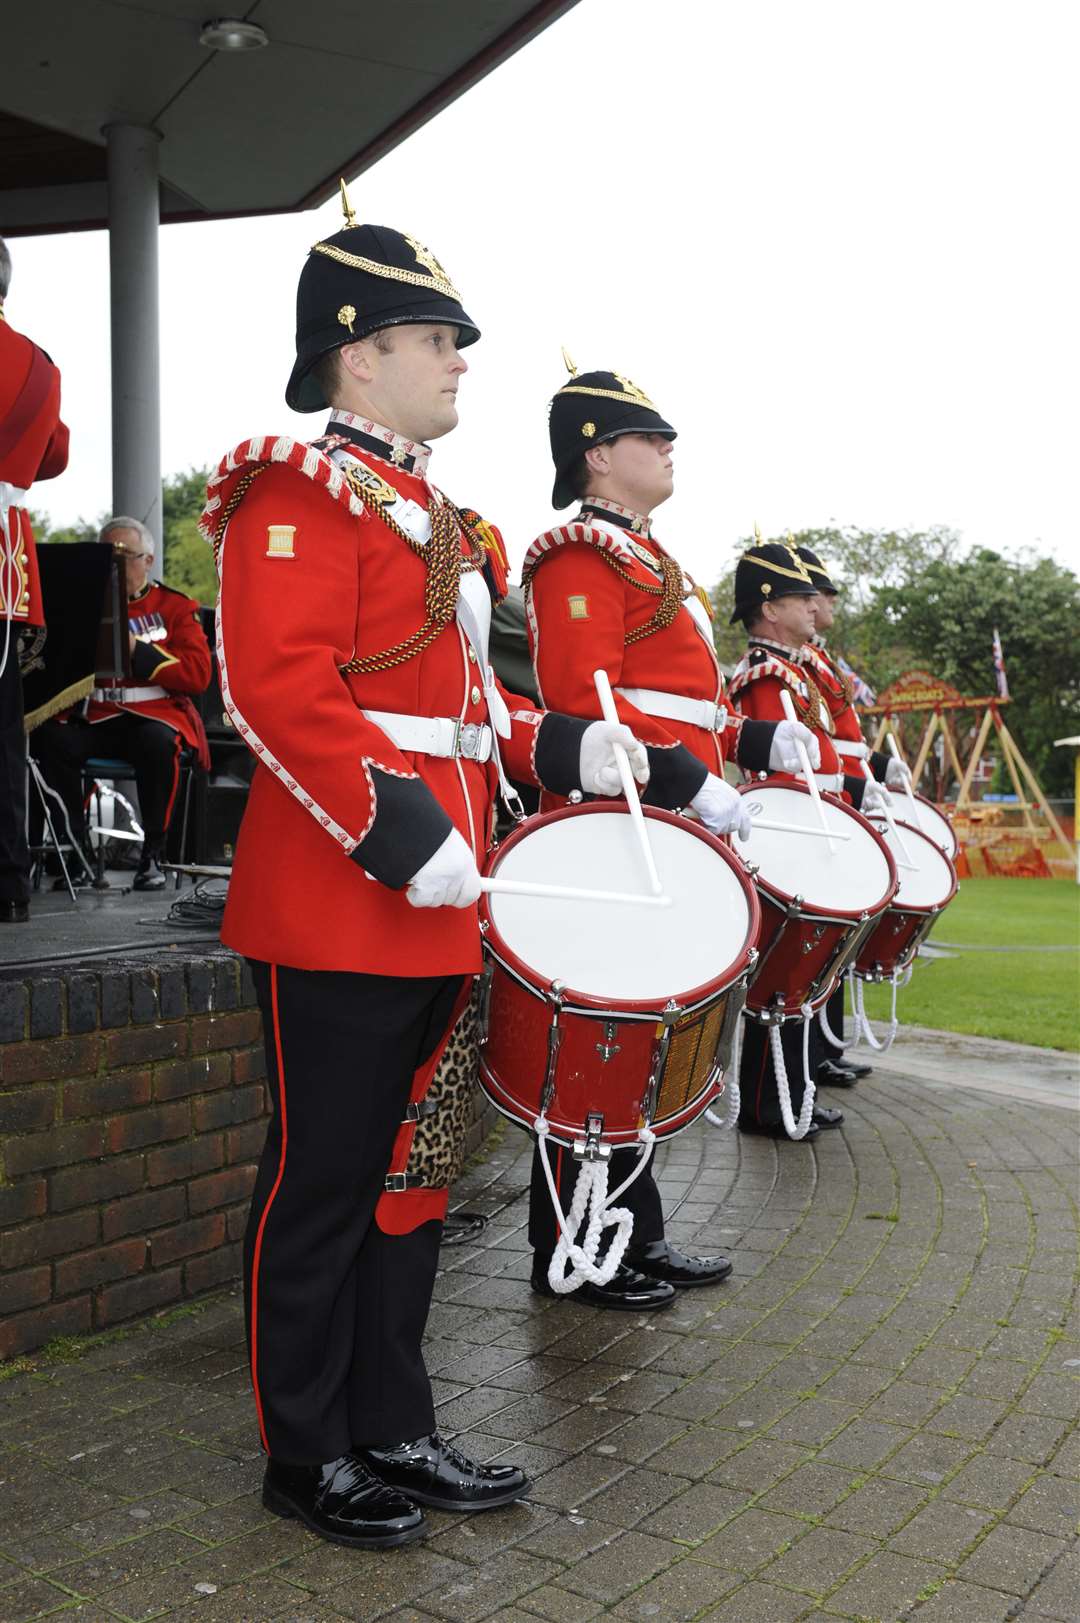 Previous Armed Forces Day in Dover